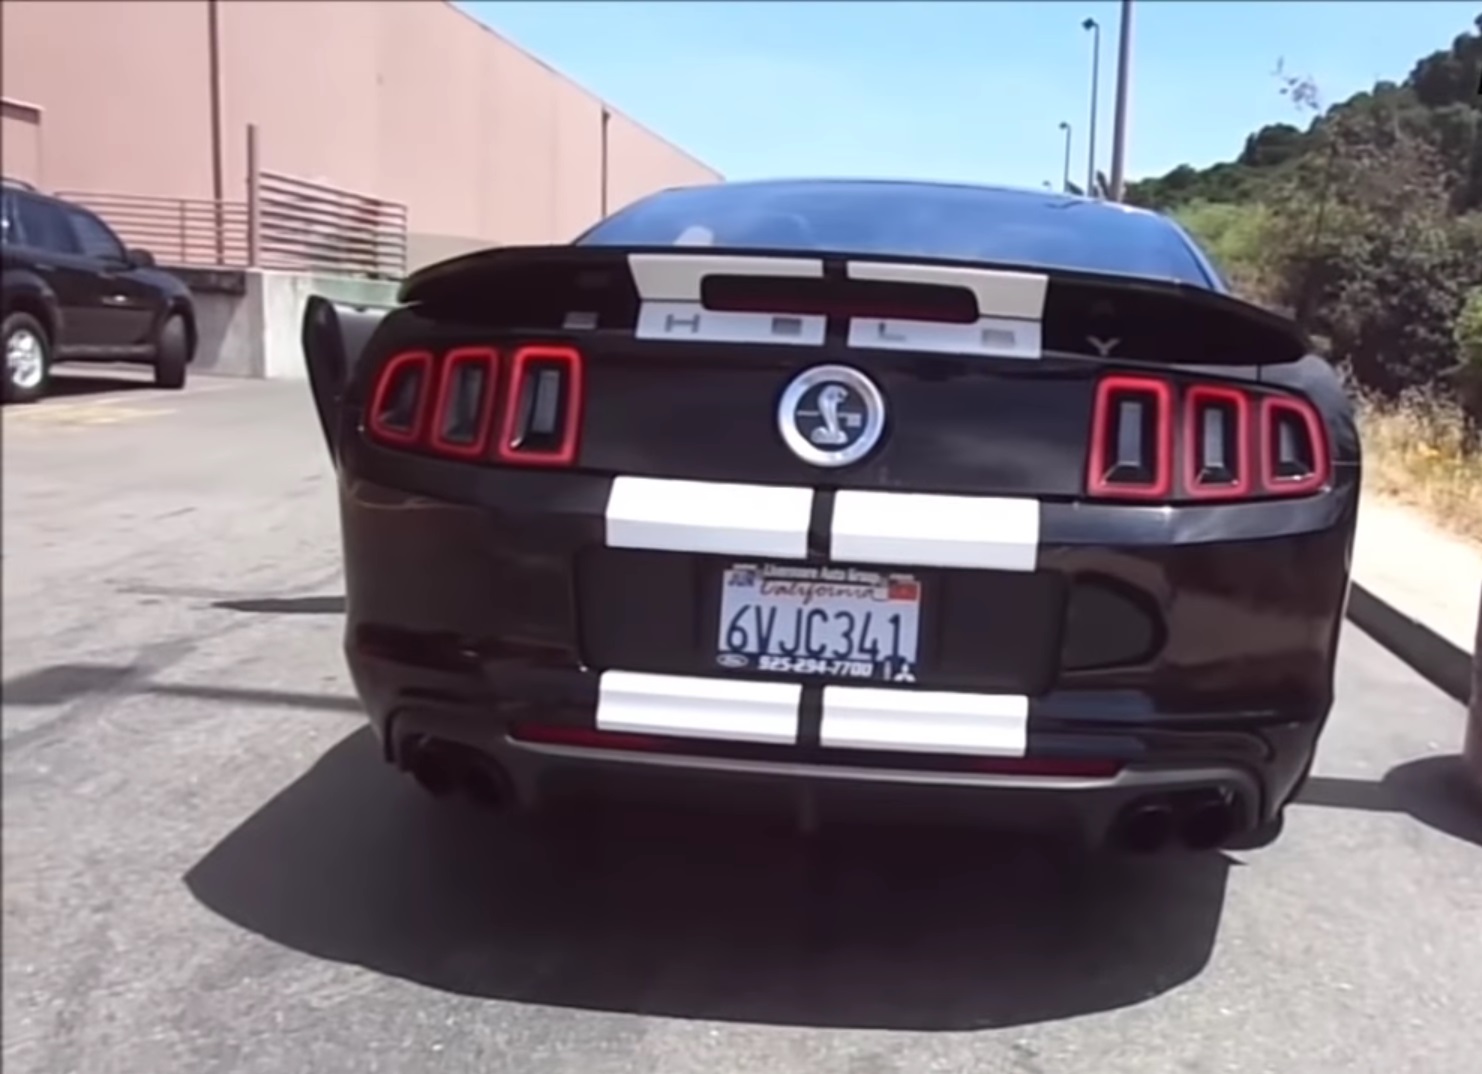 Video: 2014 Ford Mustang Shelby GT500 SVT Loud Revs + Acceleration